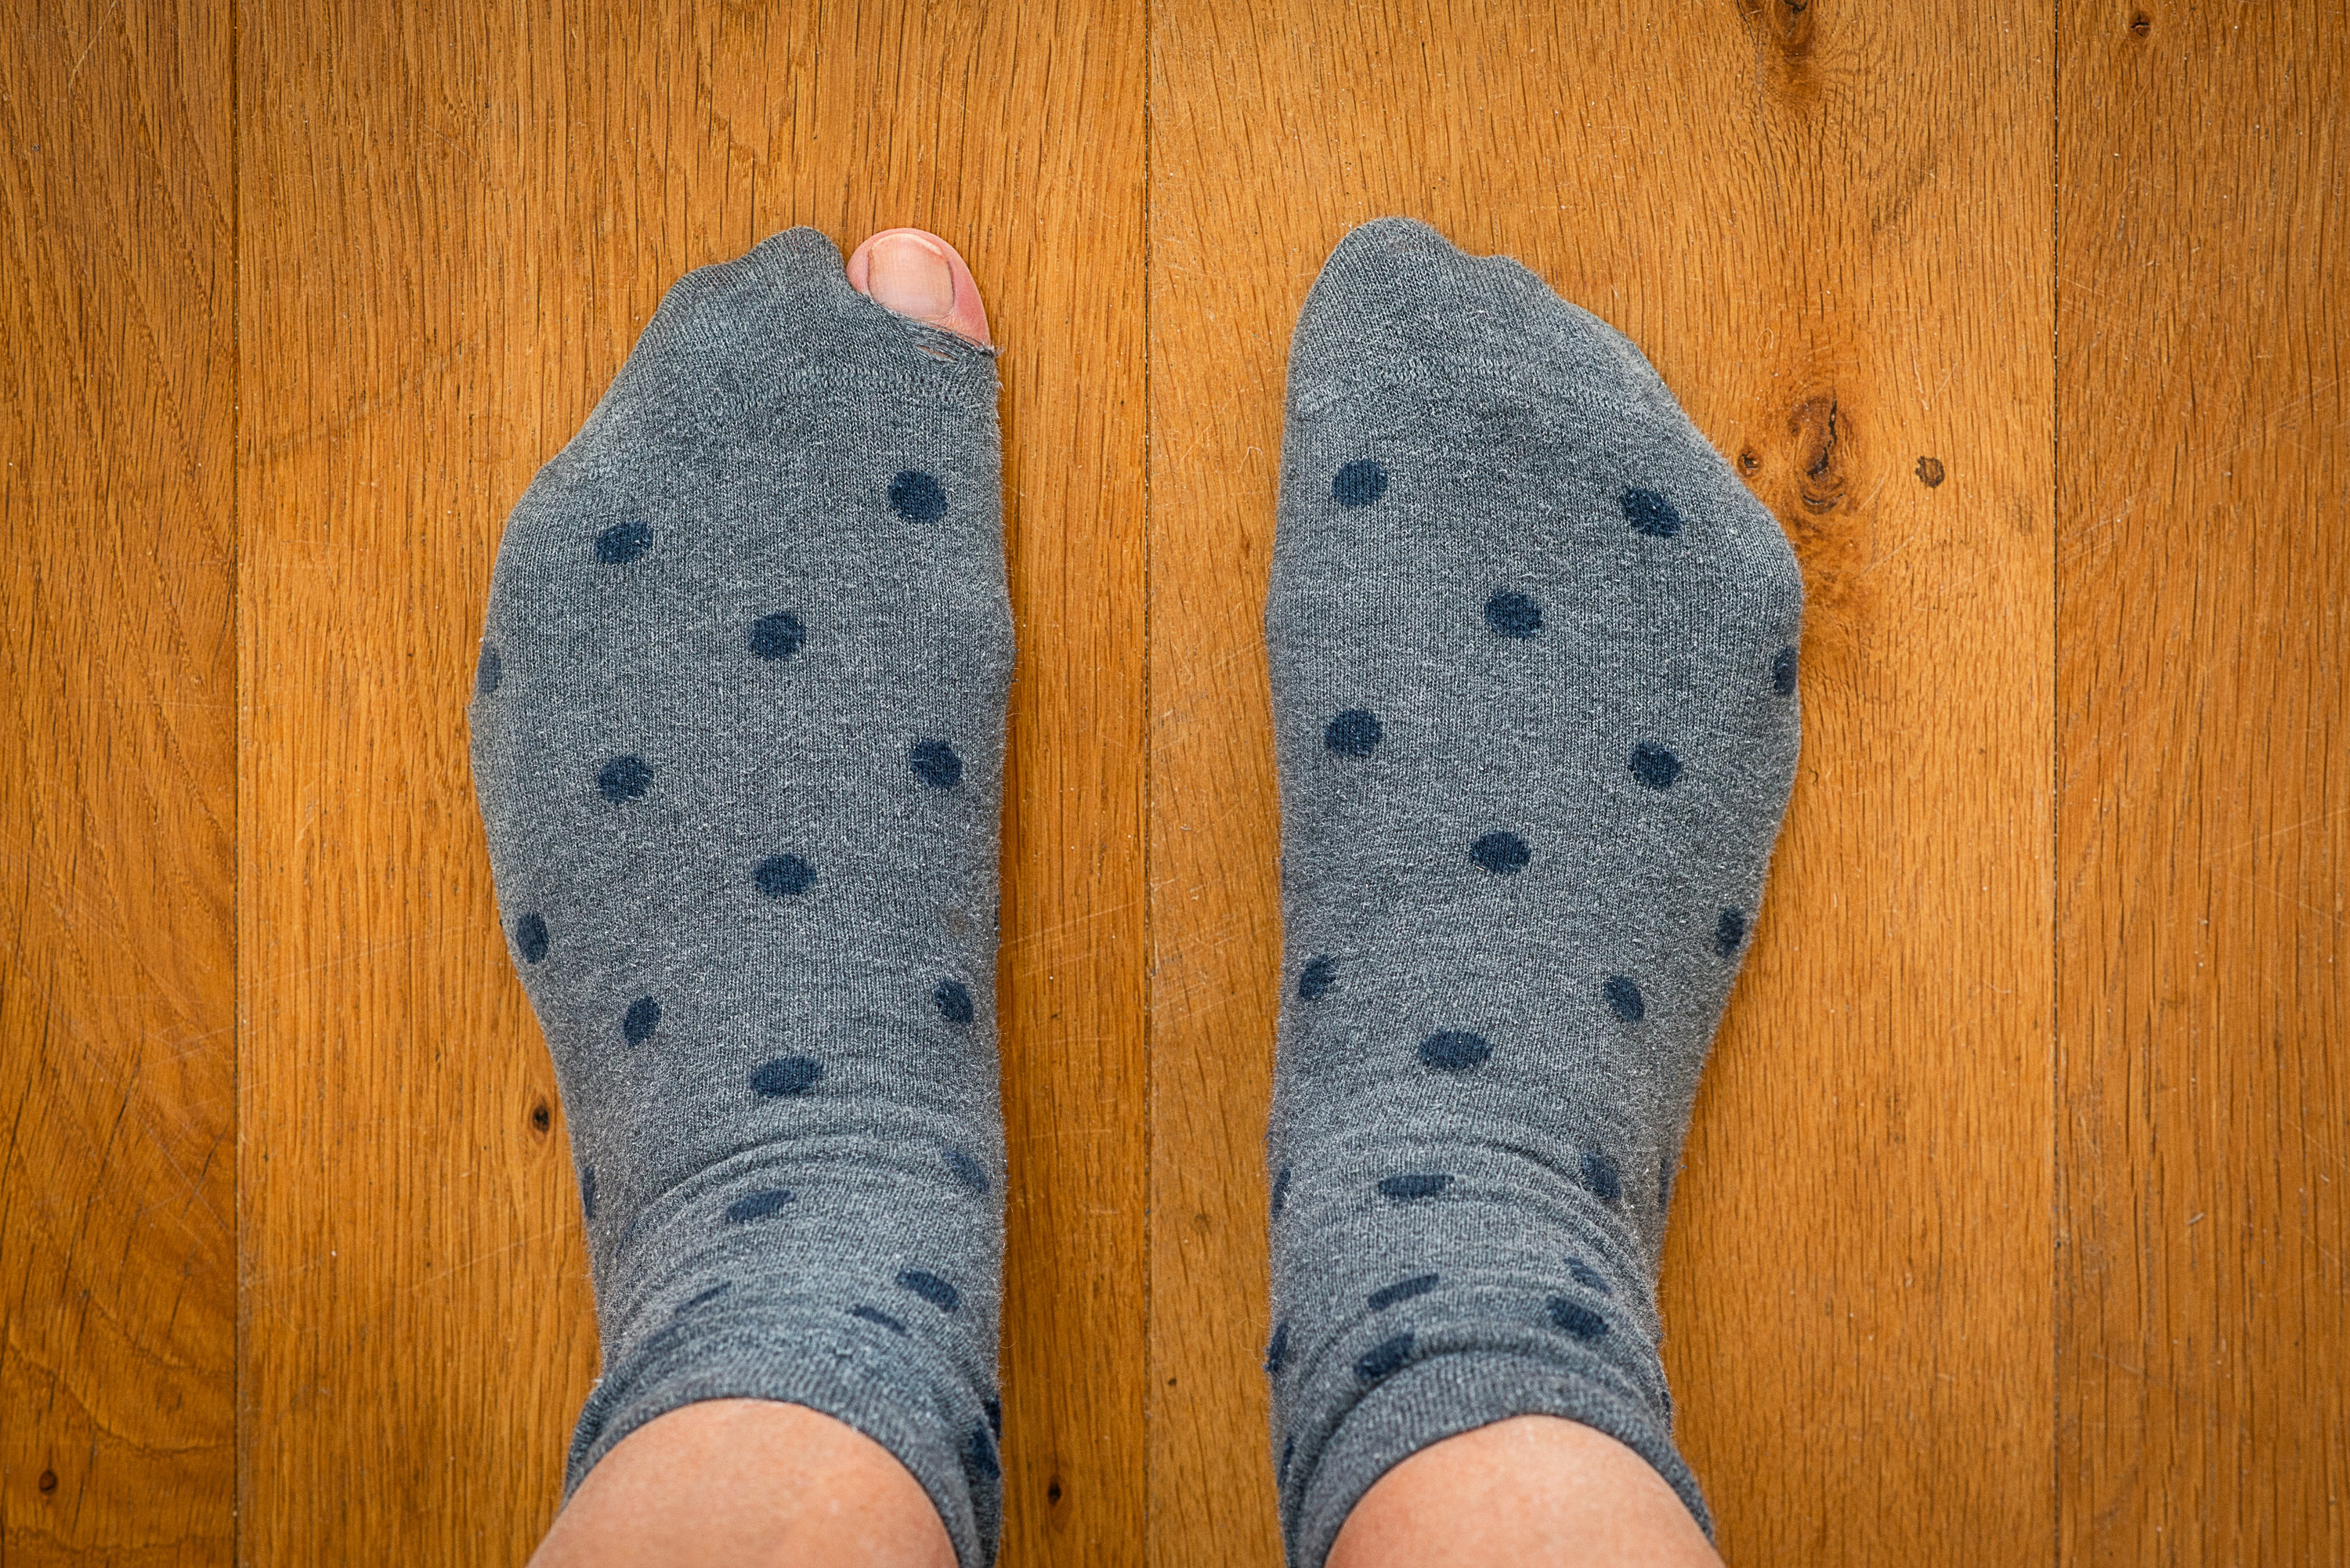 person wearing socks with a hole in one toe